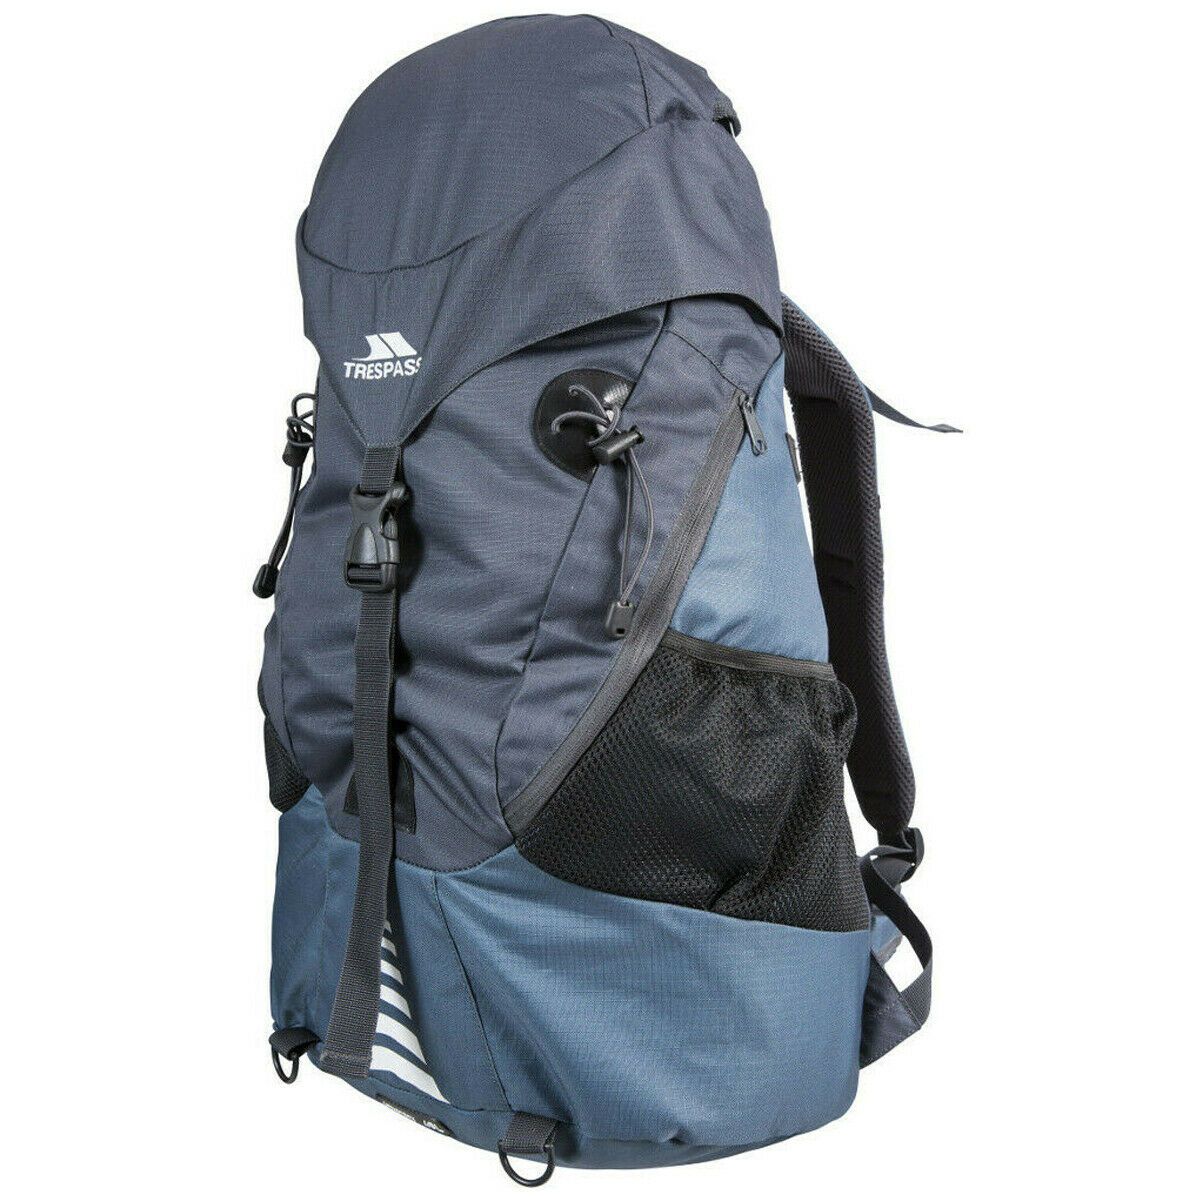 Trespass Unisex Inverary Travel Hiking Backpack Various Colours Inverary - Navy 45 Litre